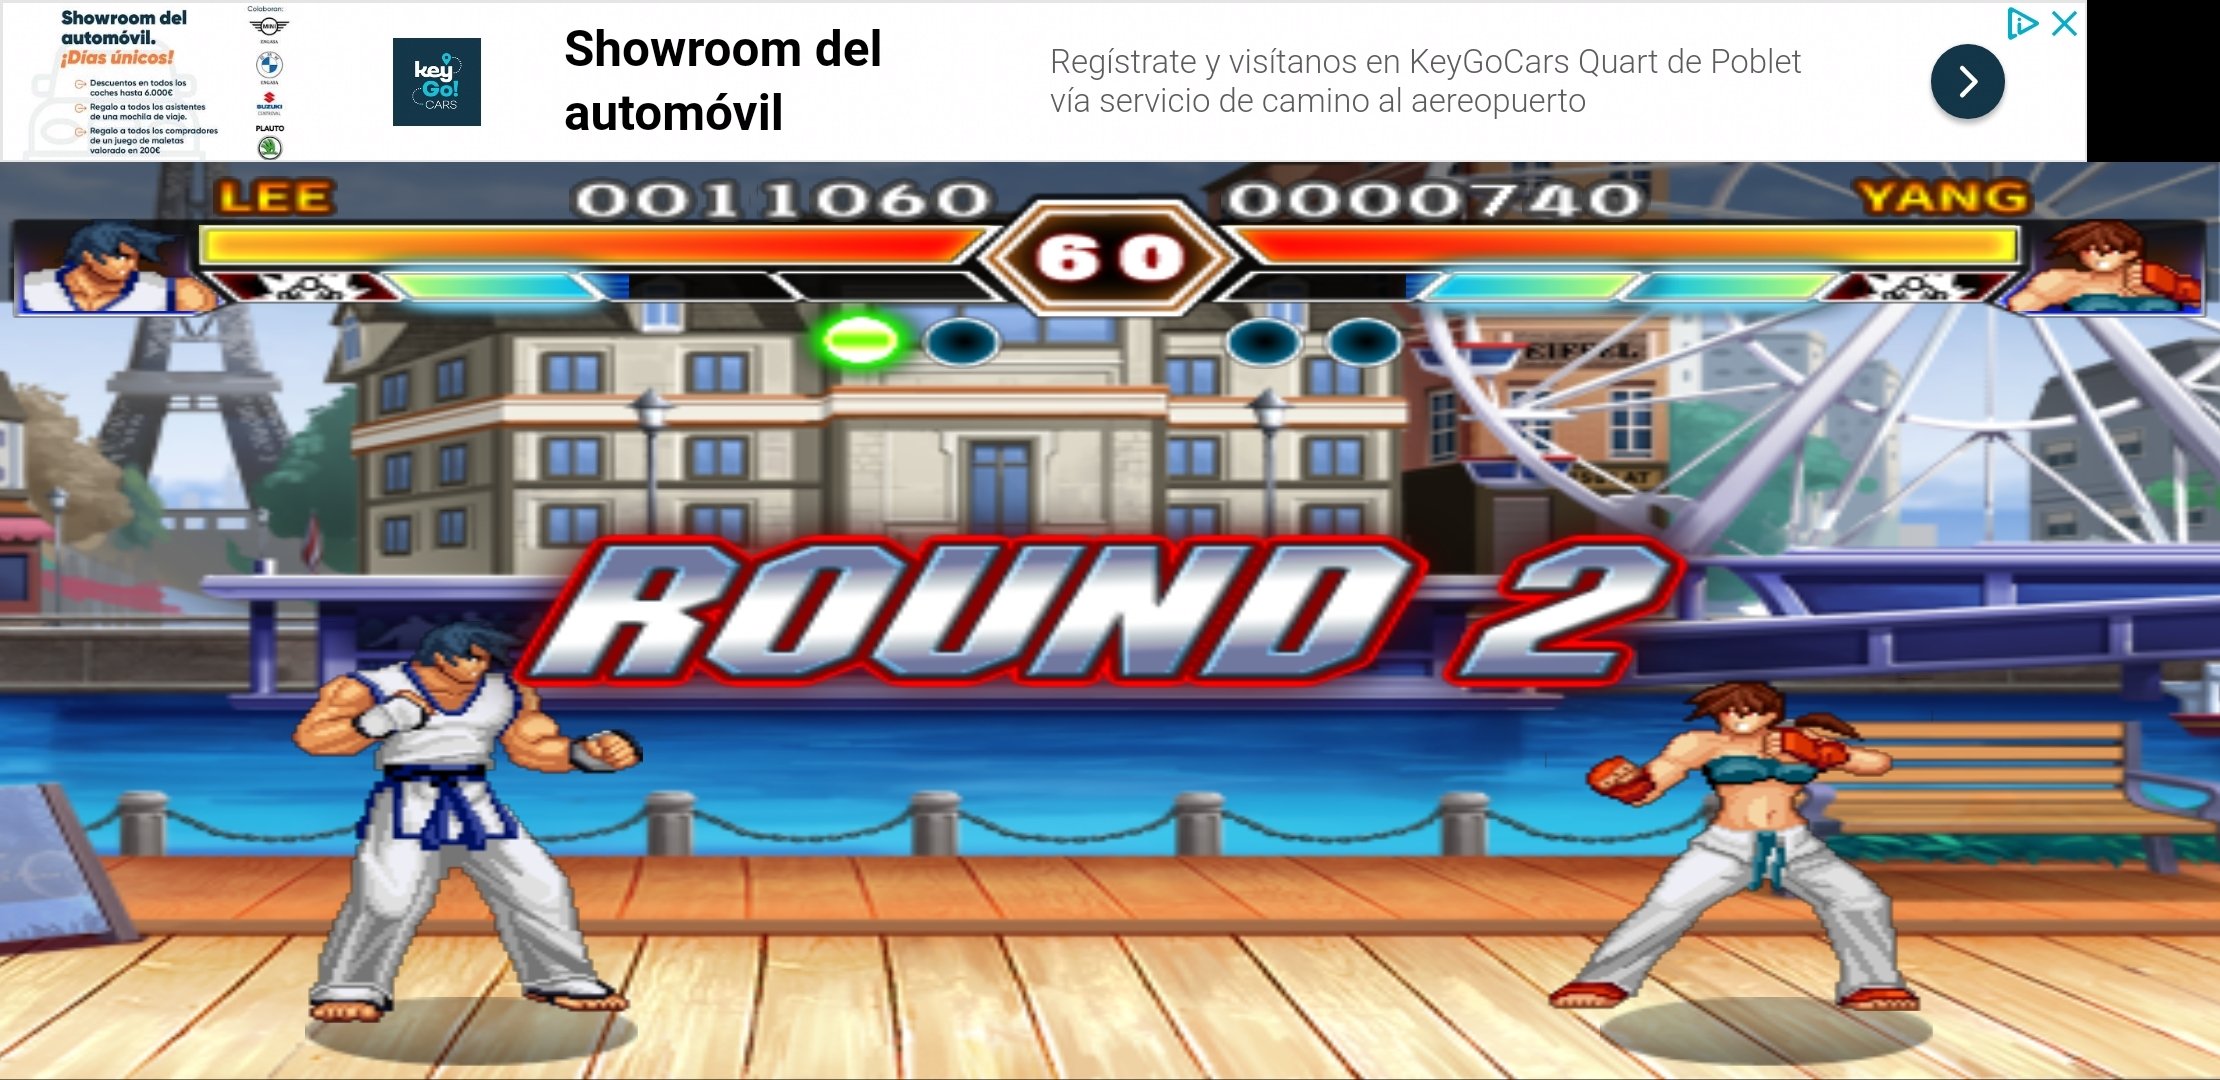 Download King of Fighting - Kung Fu & D android on PC